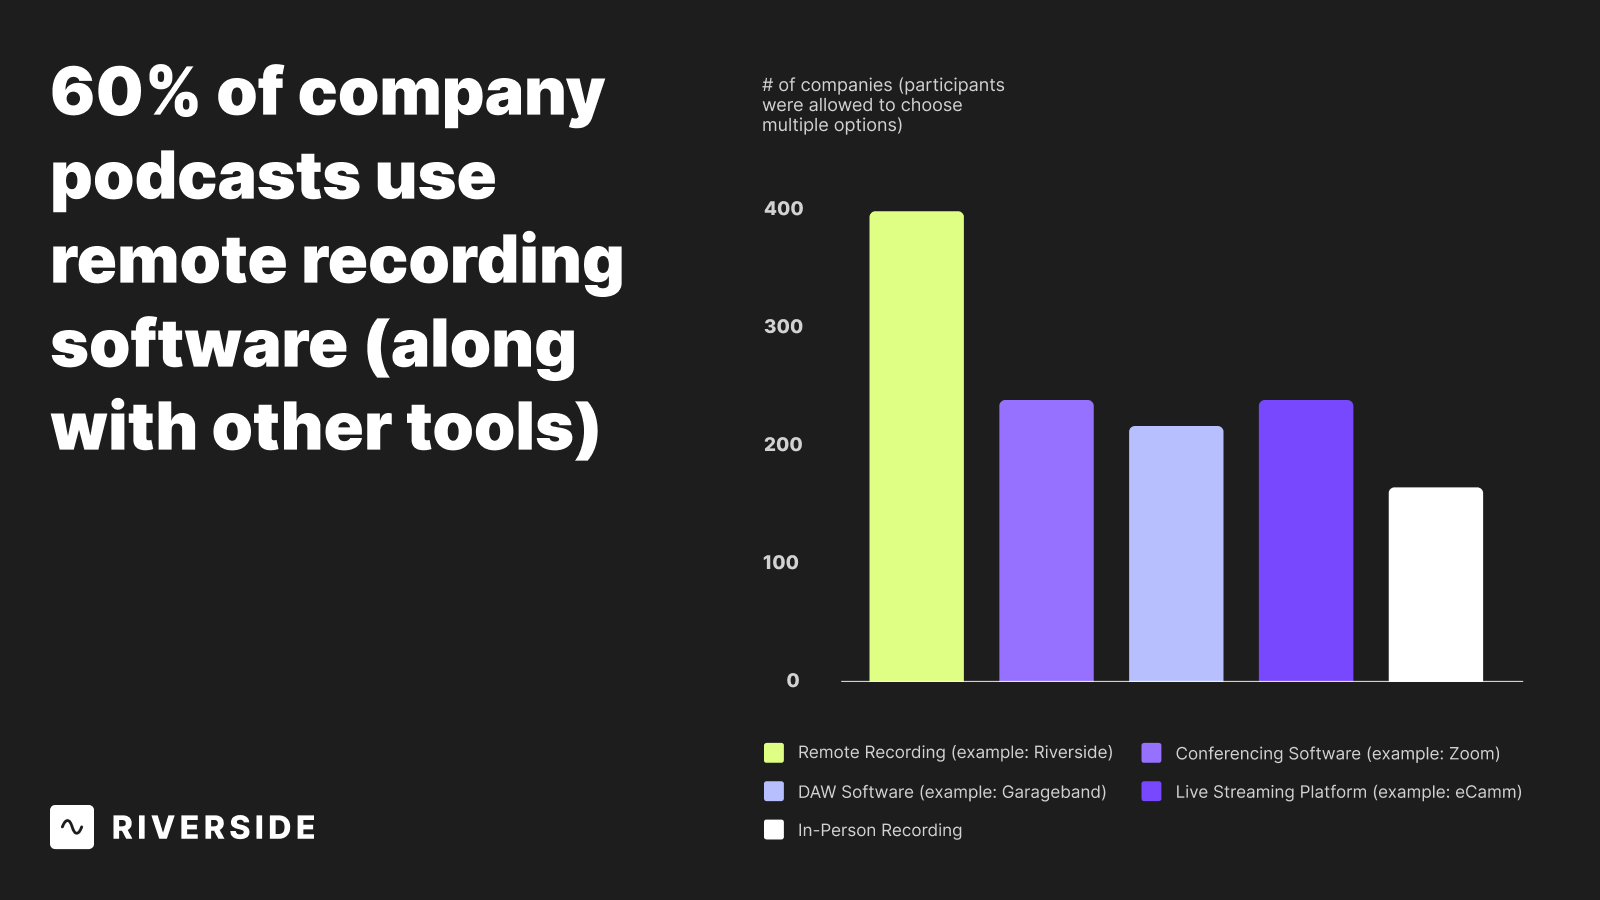 The percentage of companies that use remote recording software for creating podcasts